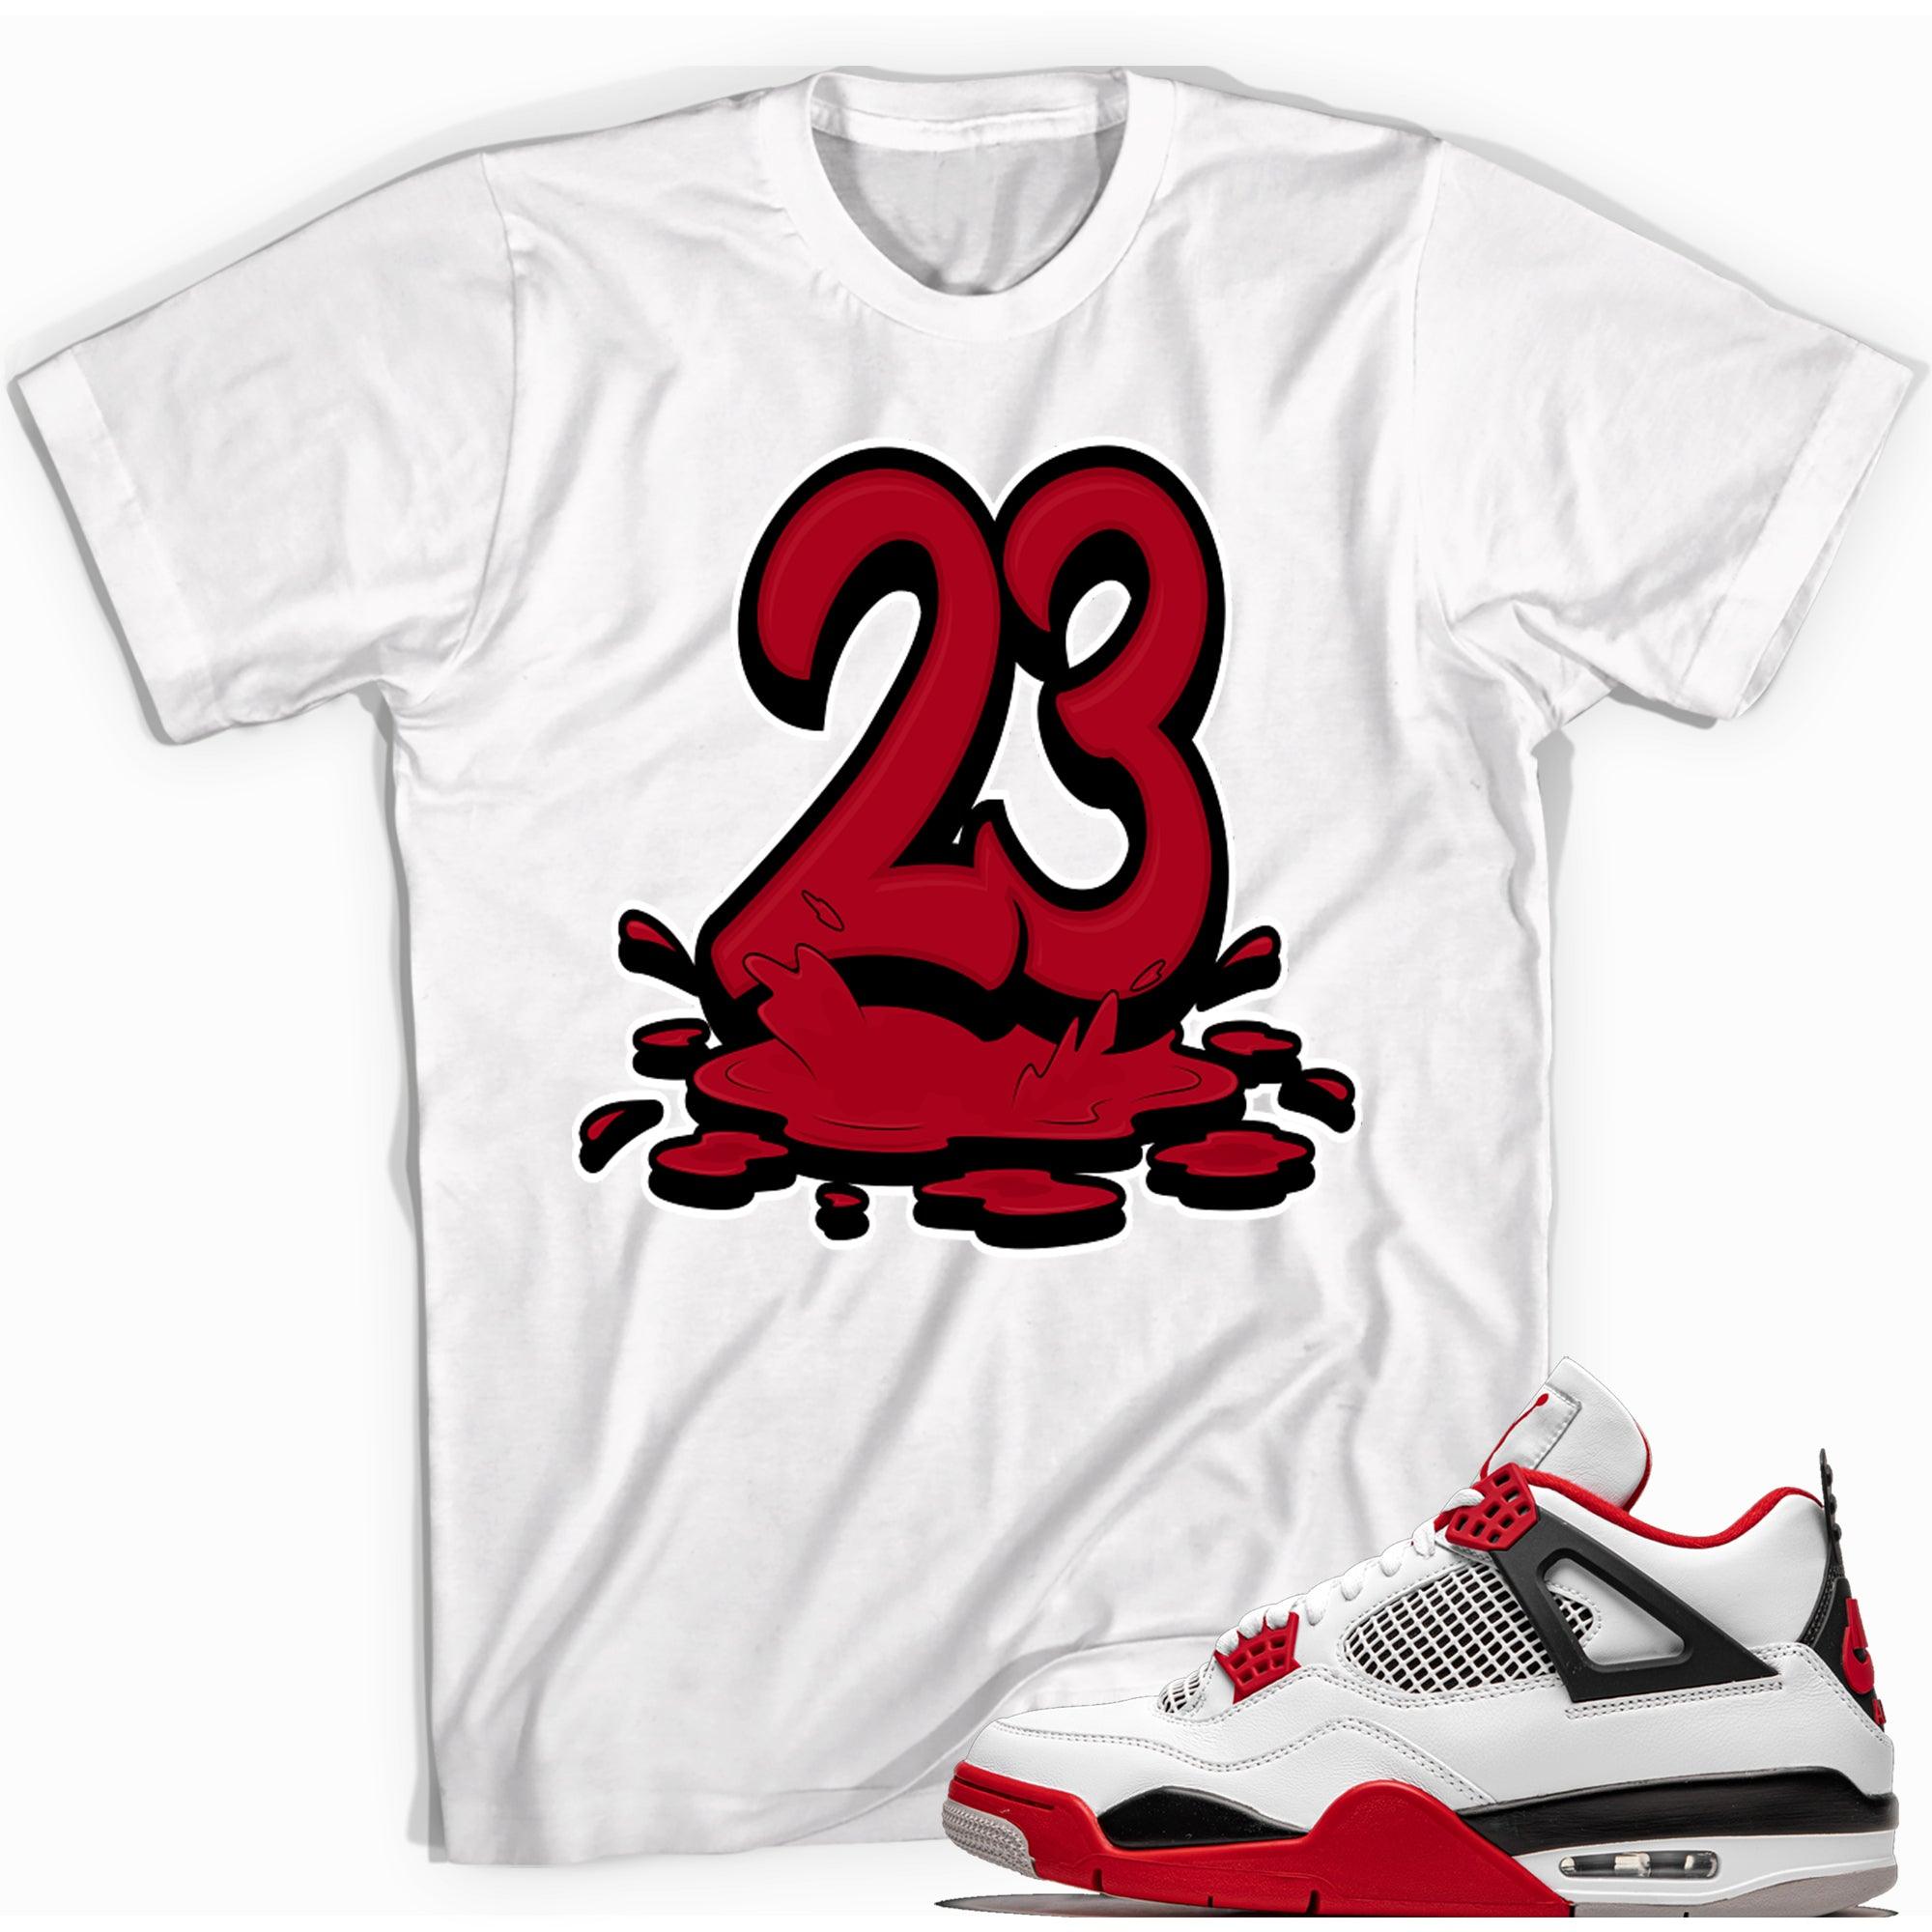 Number 23 Melting Shirt AJ 4 Fire Red photo